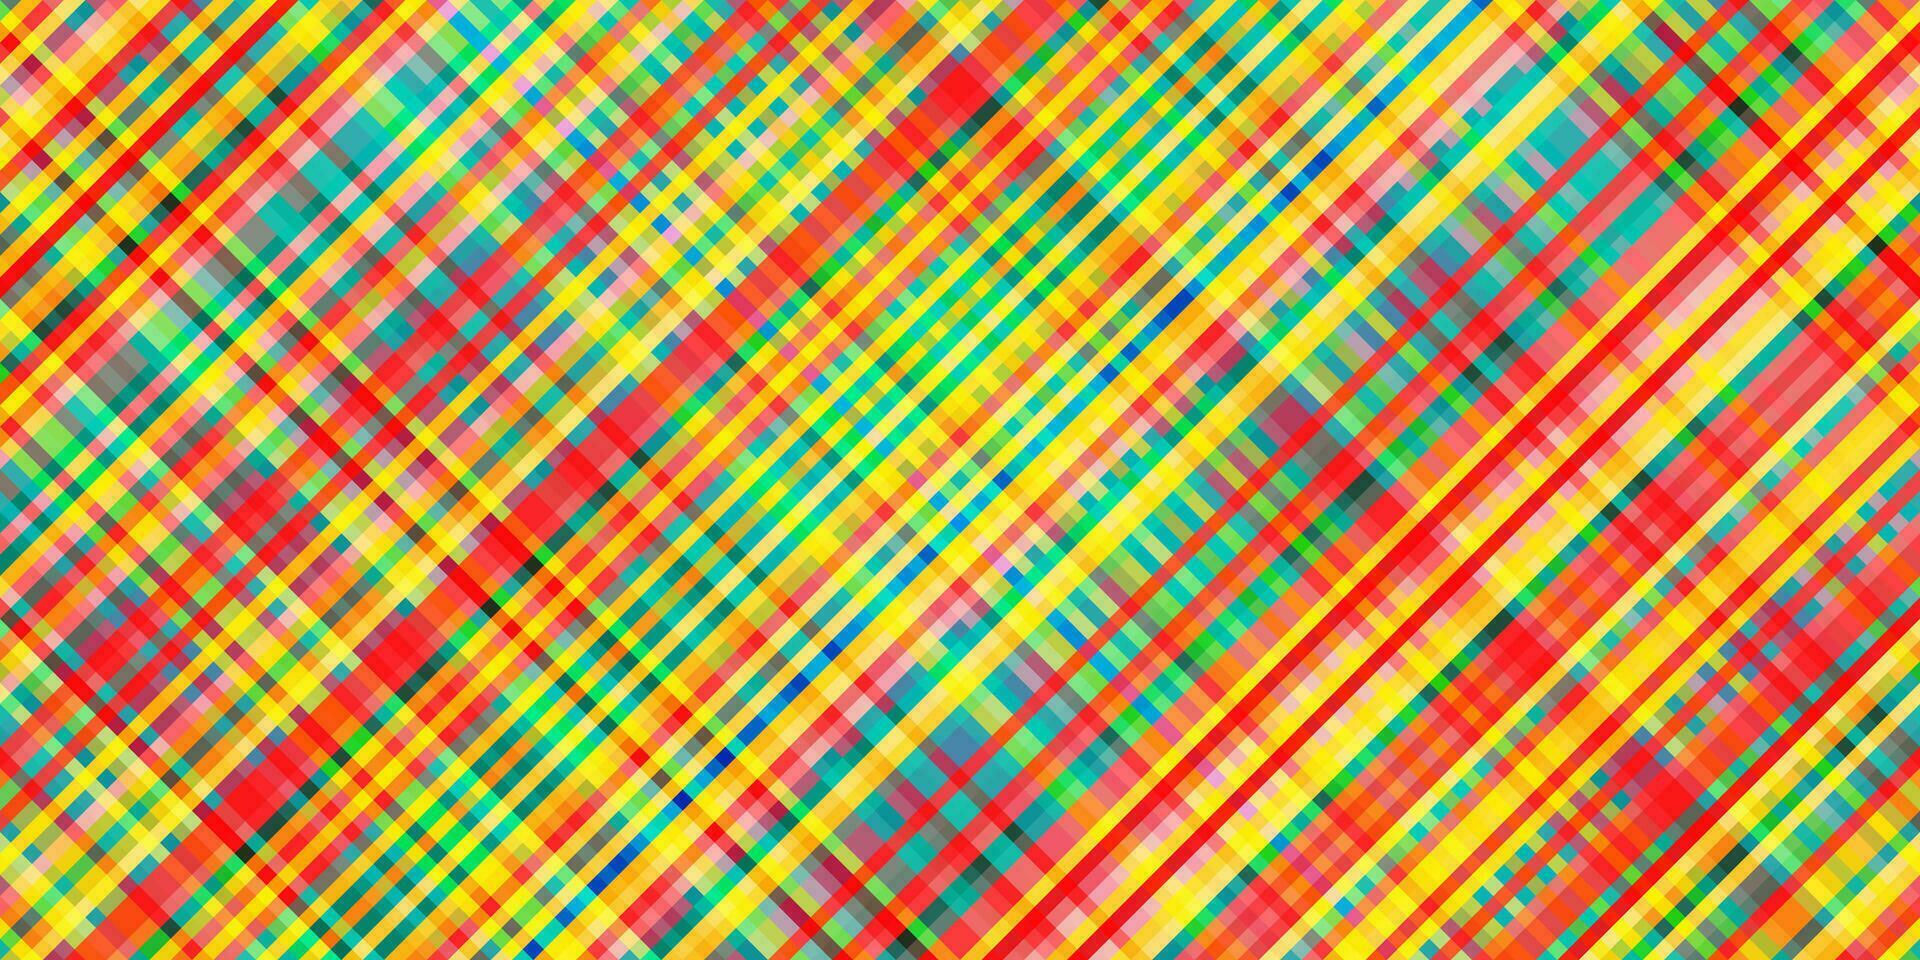 Multicolored colorful Diagonal lines background vector